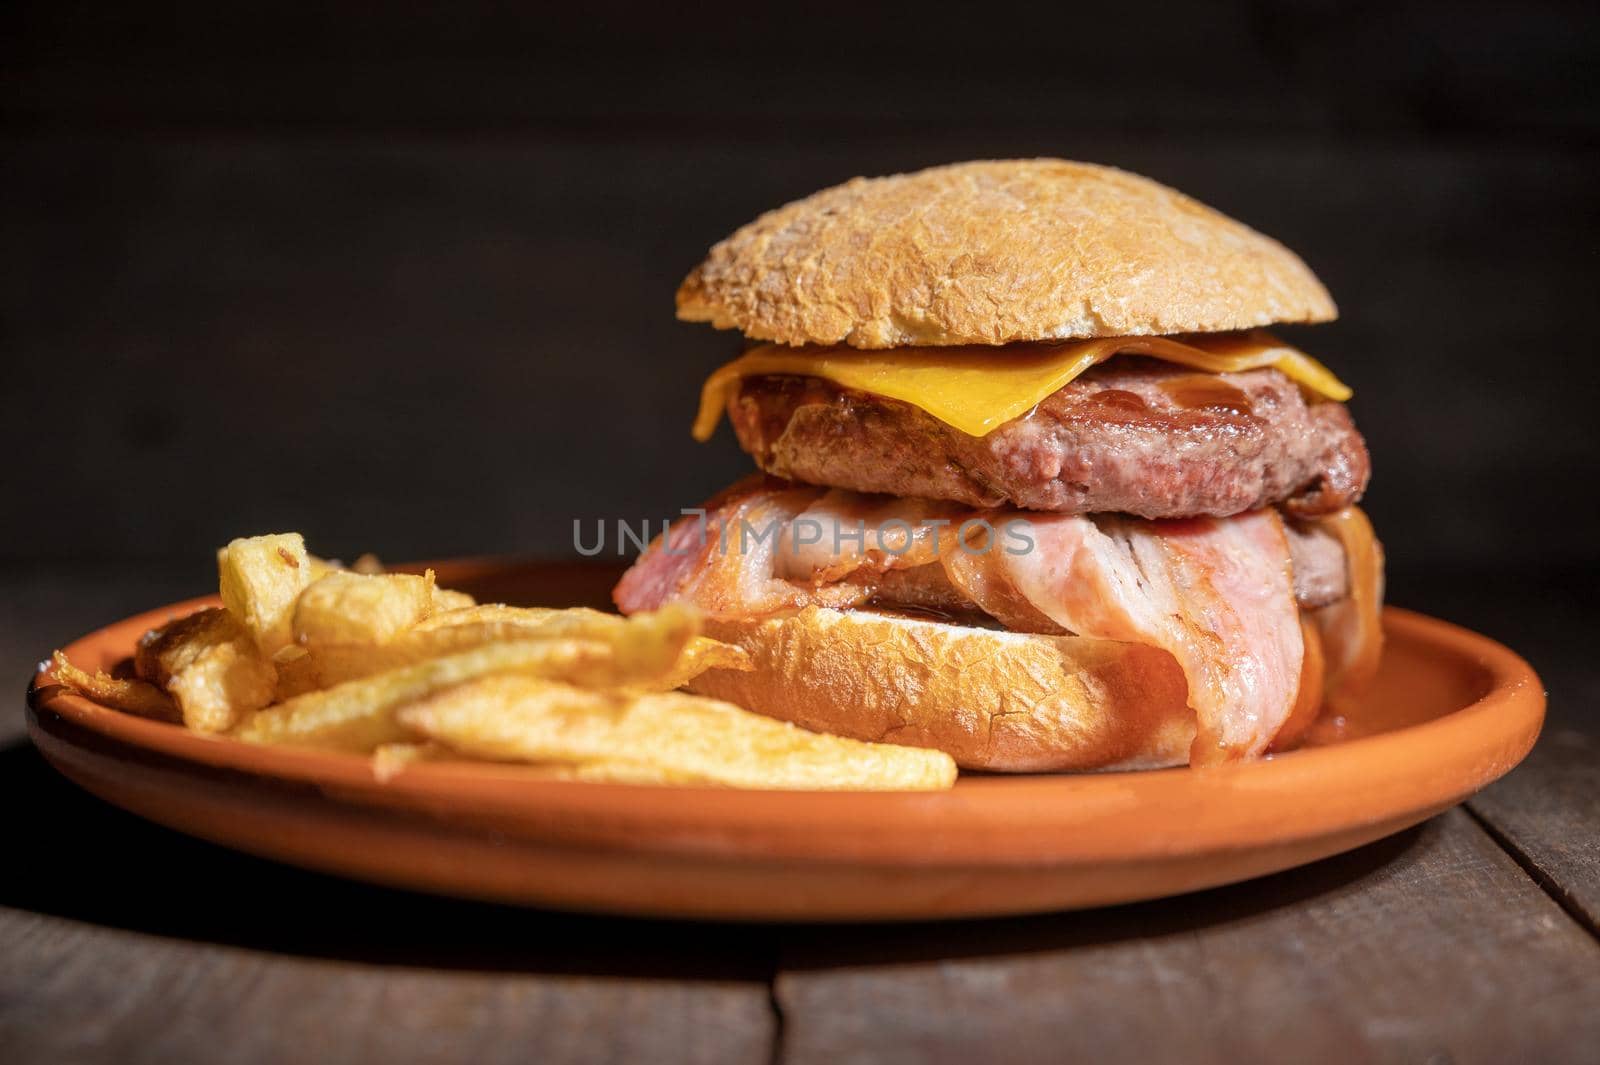 Premium grilled beef hamburger with bacon, cheese and French fries. Delicious American burger on wooden background. by HERRAEZ